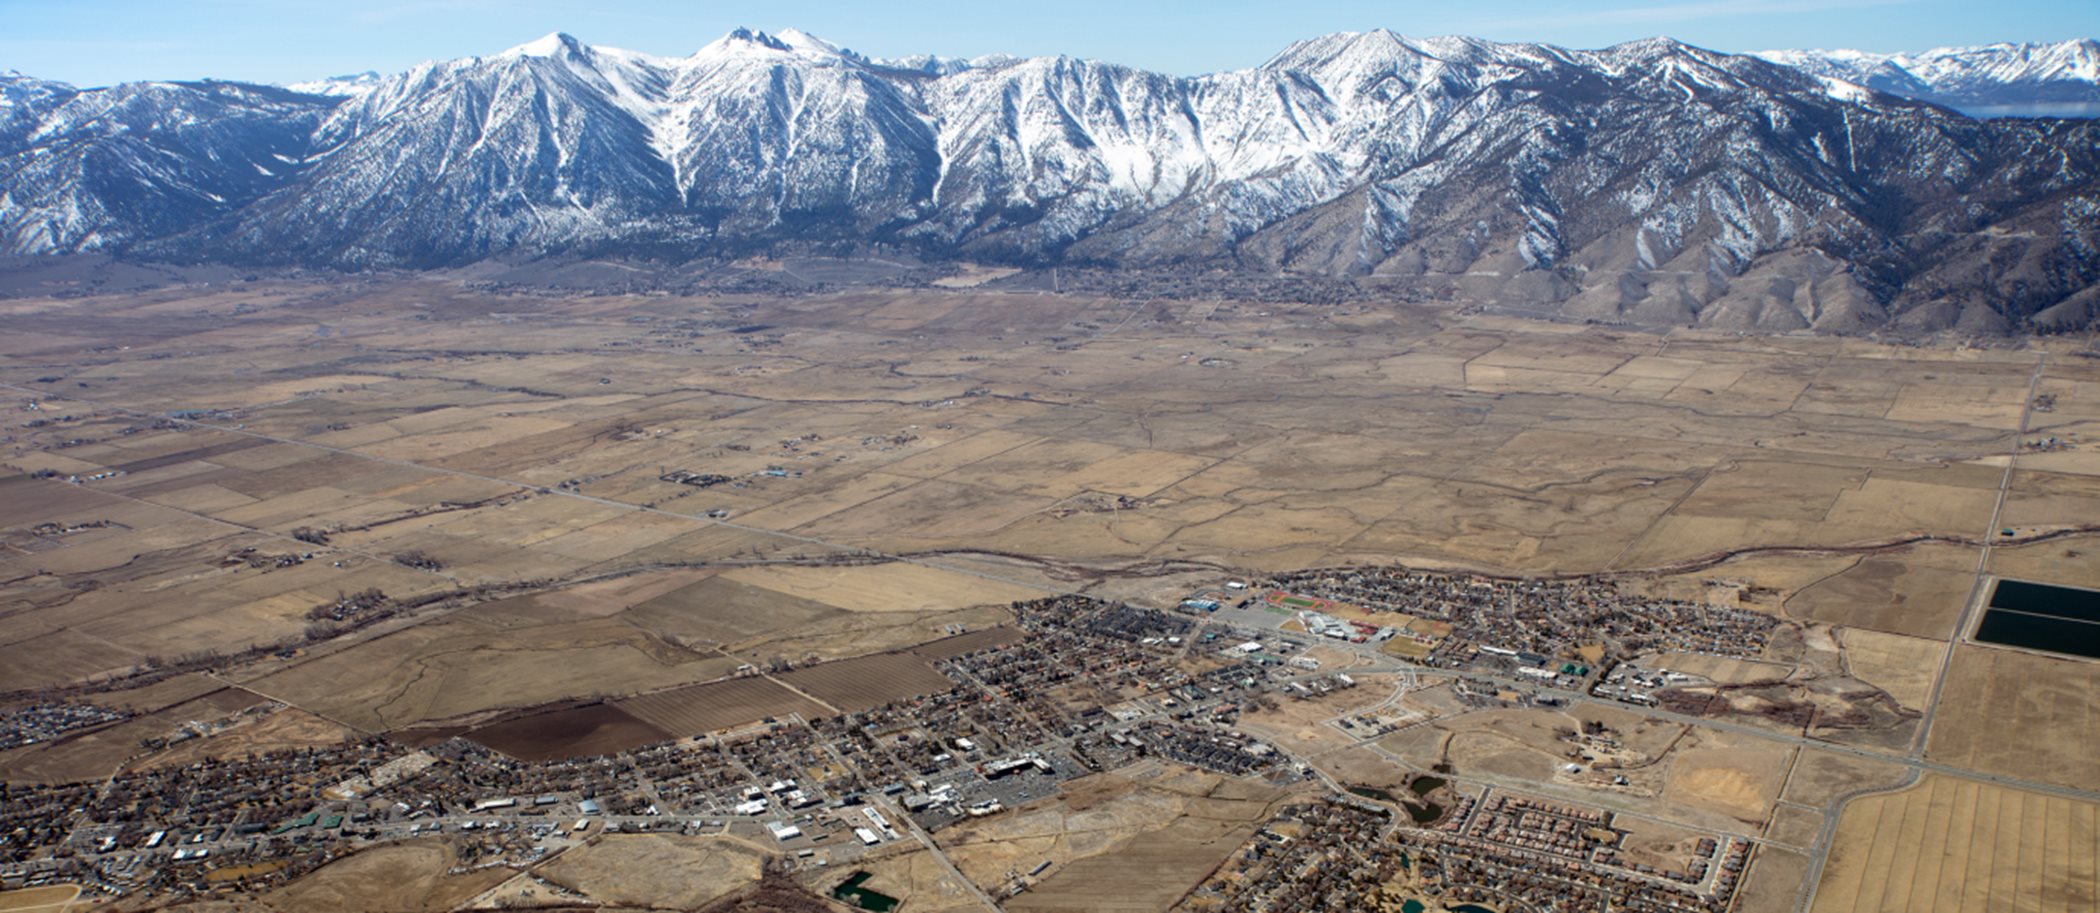 Aerial view of community with mountains in background